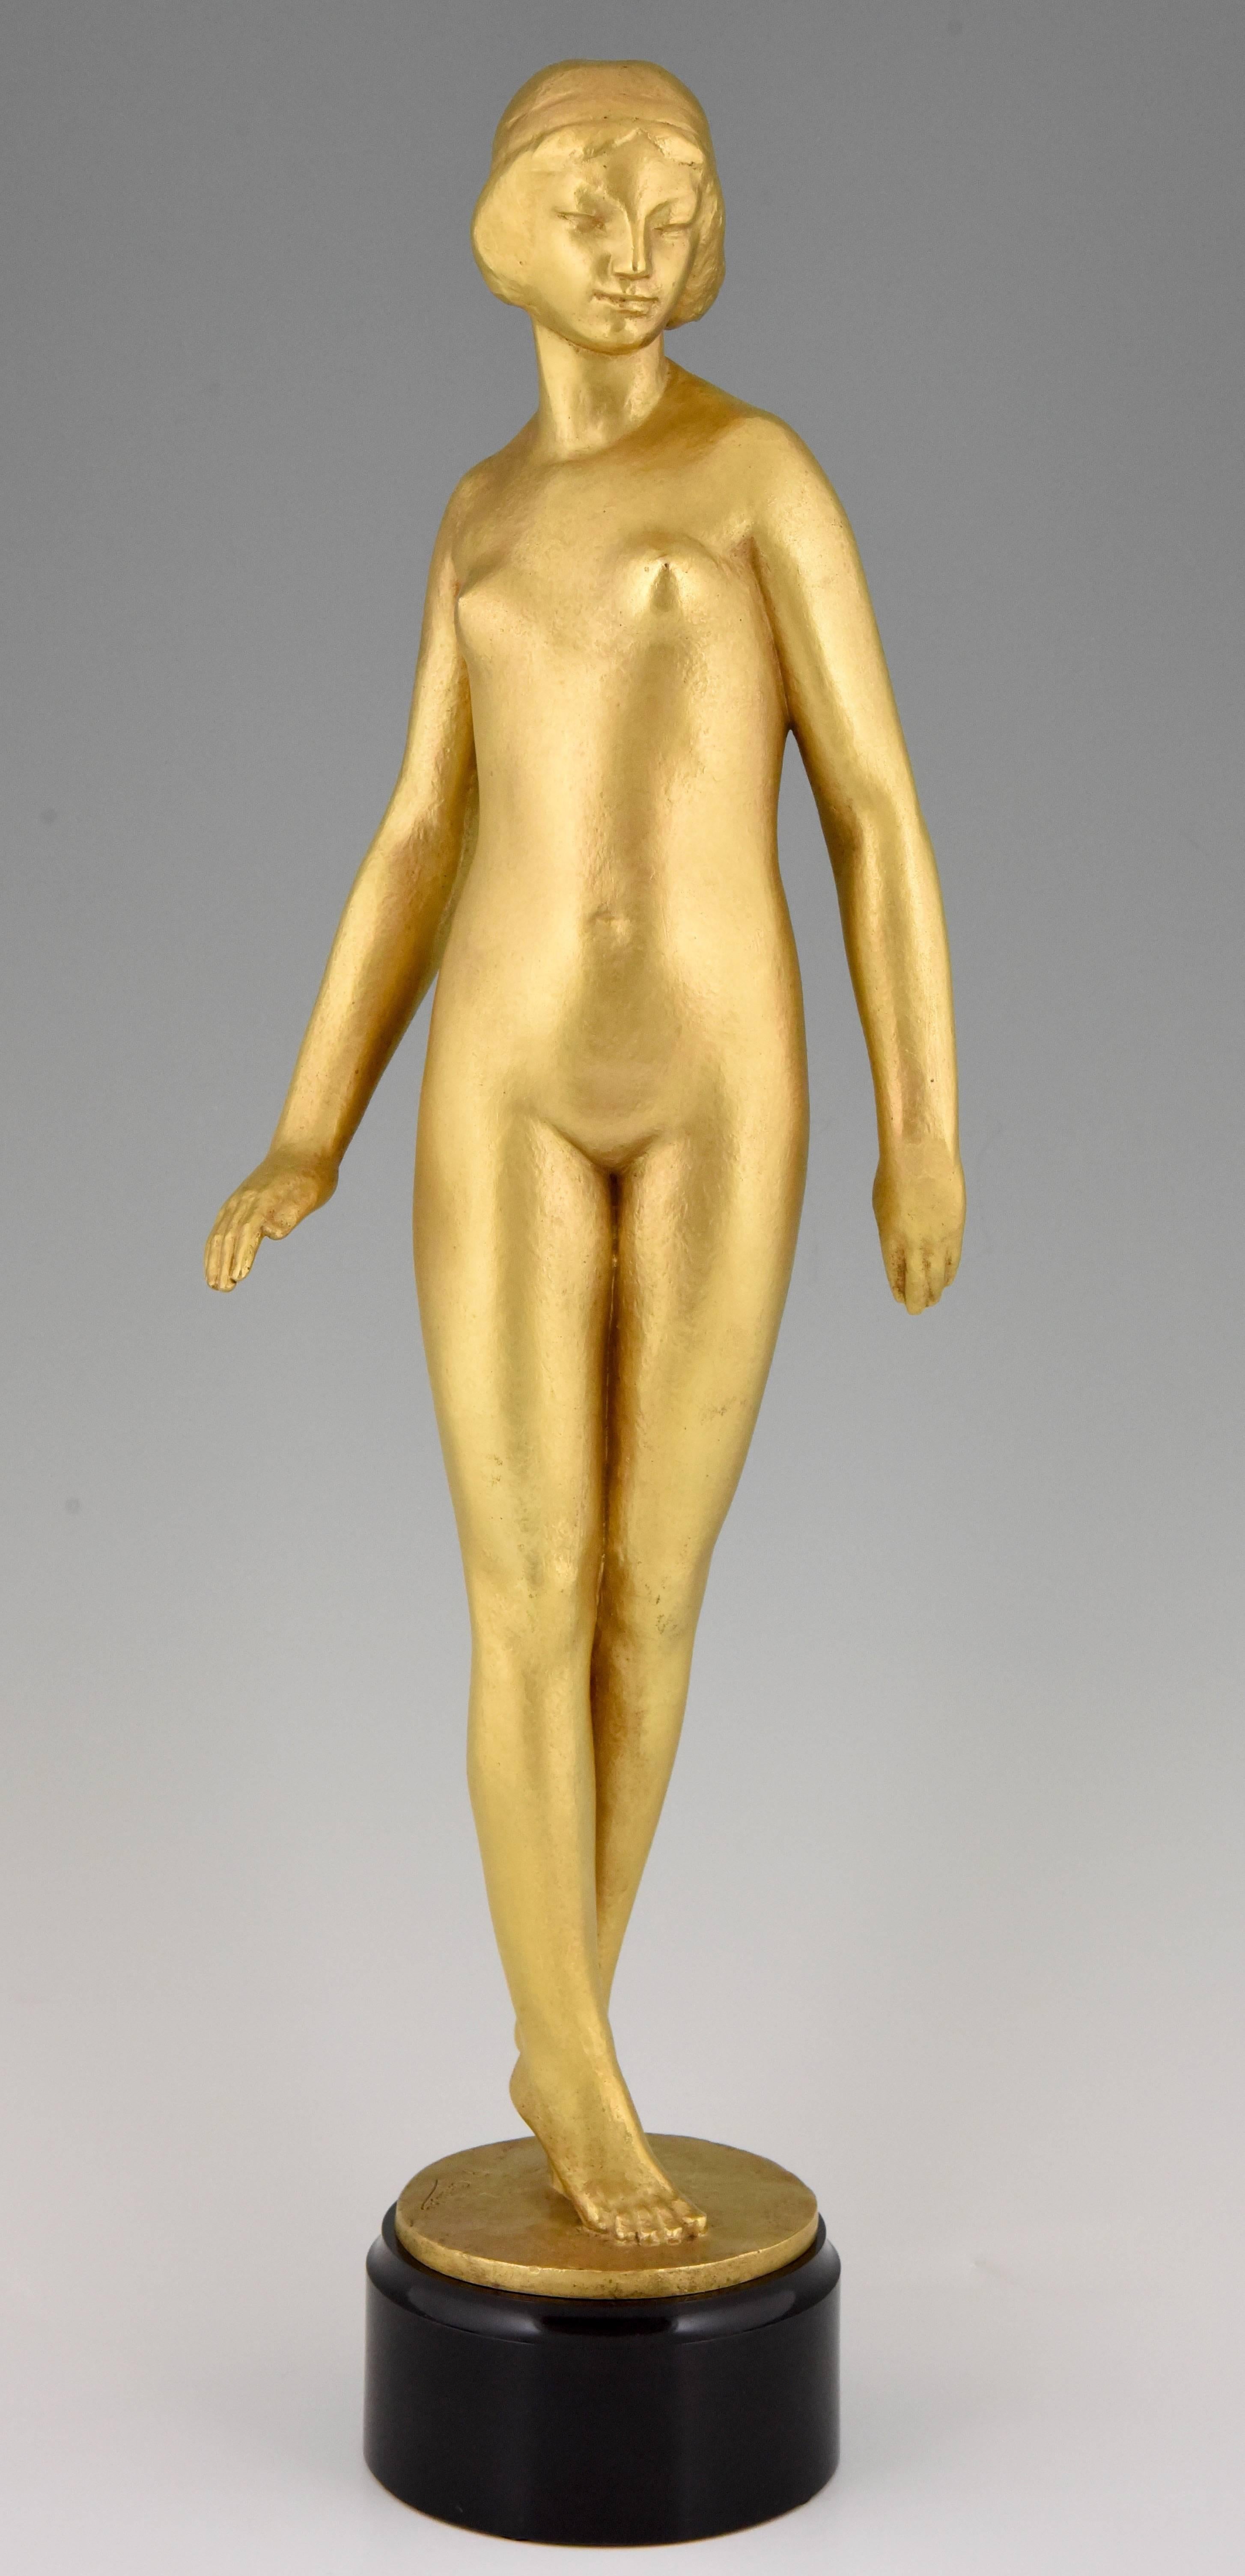 Beautiful typical French Art Deco sculpture of an elegant standing nude bather by Gaston Louis Joseph Contesse. This fine gilt bronze figurine has been cast by the Alex Rudier foundry in Paris.
The sculpture is 23 inch high and stands on a circular